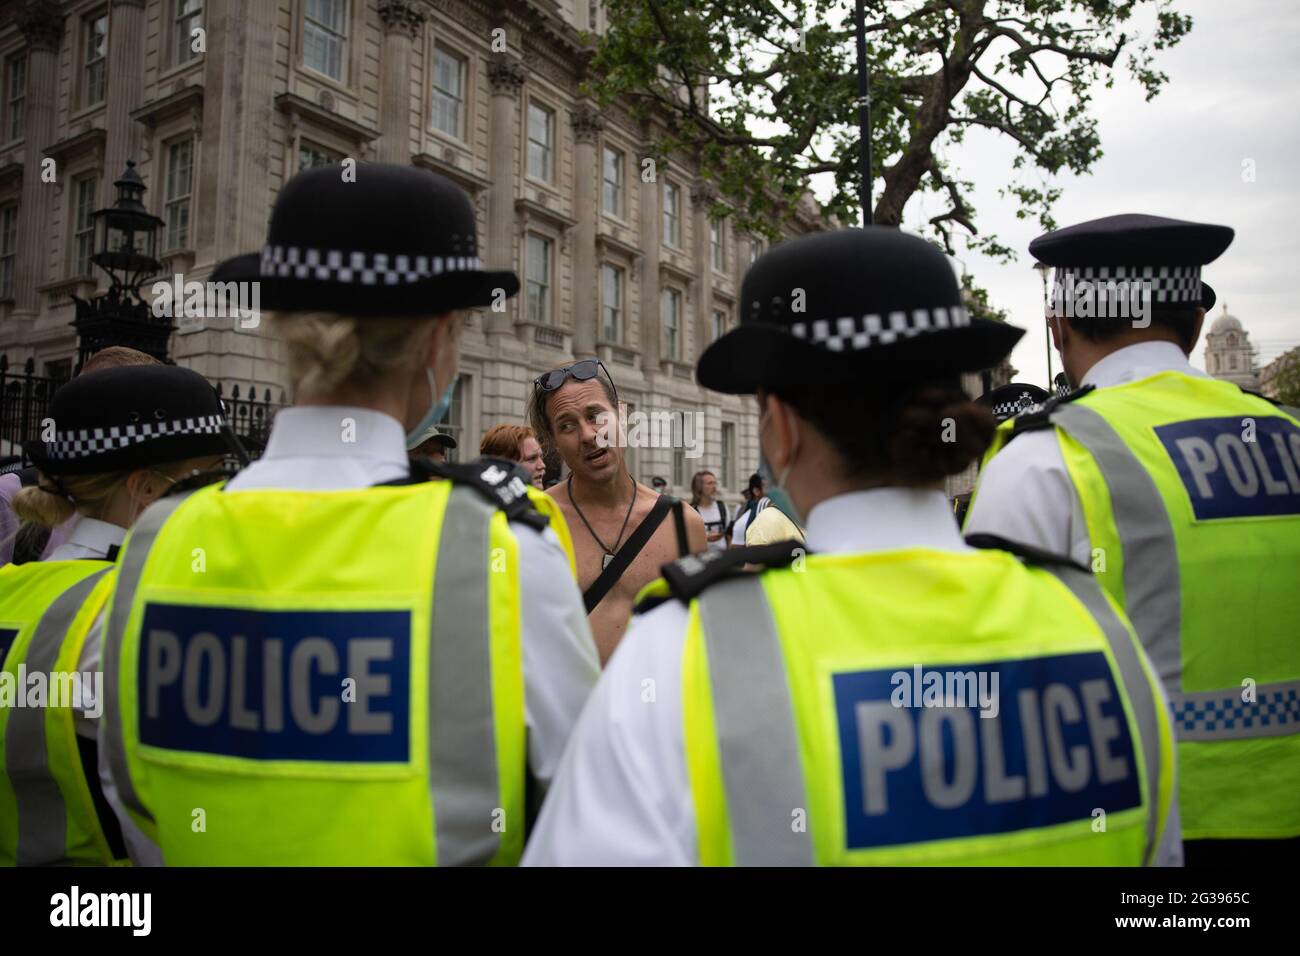 London, UK. 14th June 2021. Anti-vaxx protester confronts police officer outside Downing Street. Yuen Ching Ng/Alamy Live News. Y Stock Photo